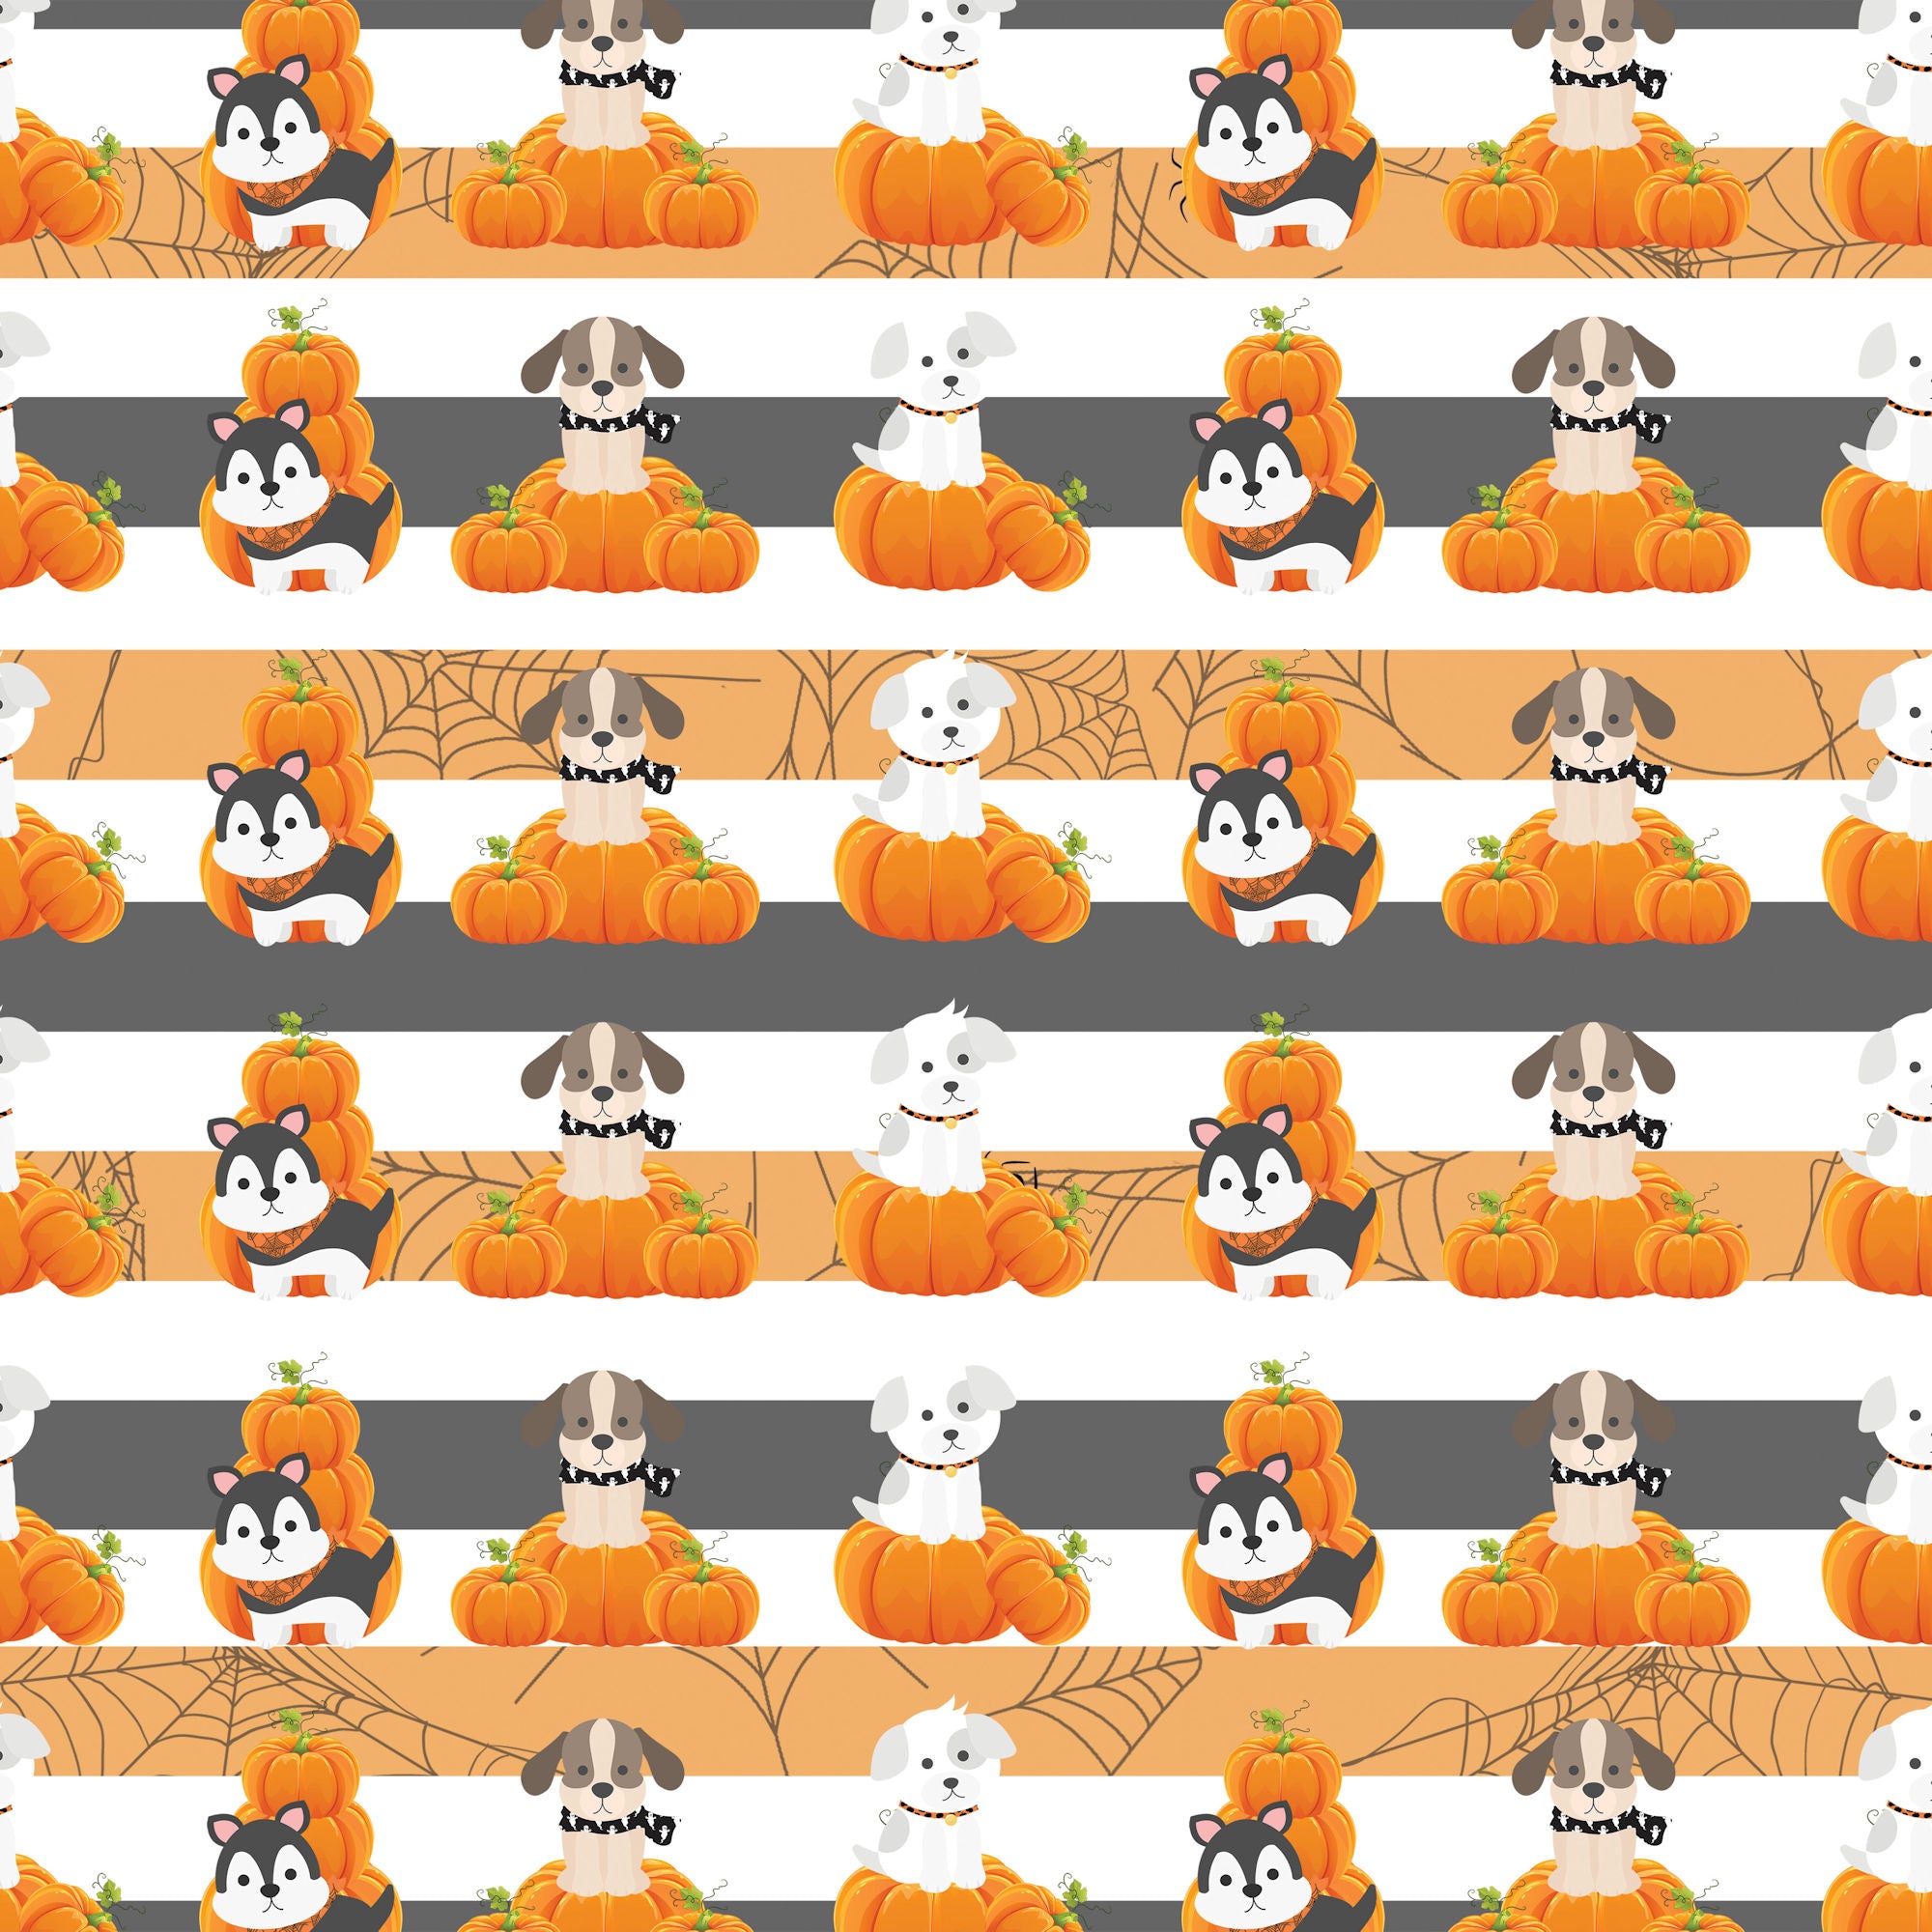 Happy Bow-Wow-Ween Collection Puppy Pumpkin Party 12 x 12 Double-Sided Scrapbook Paper by SSC Designs